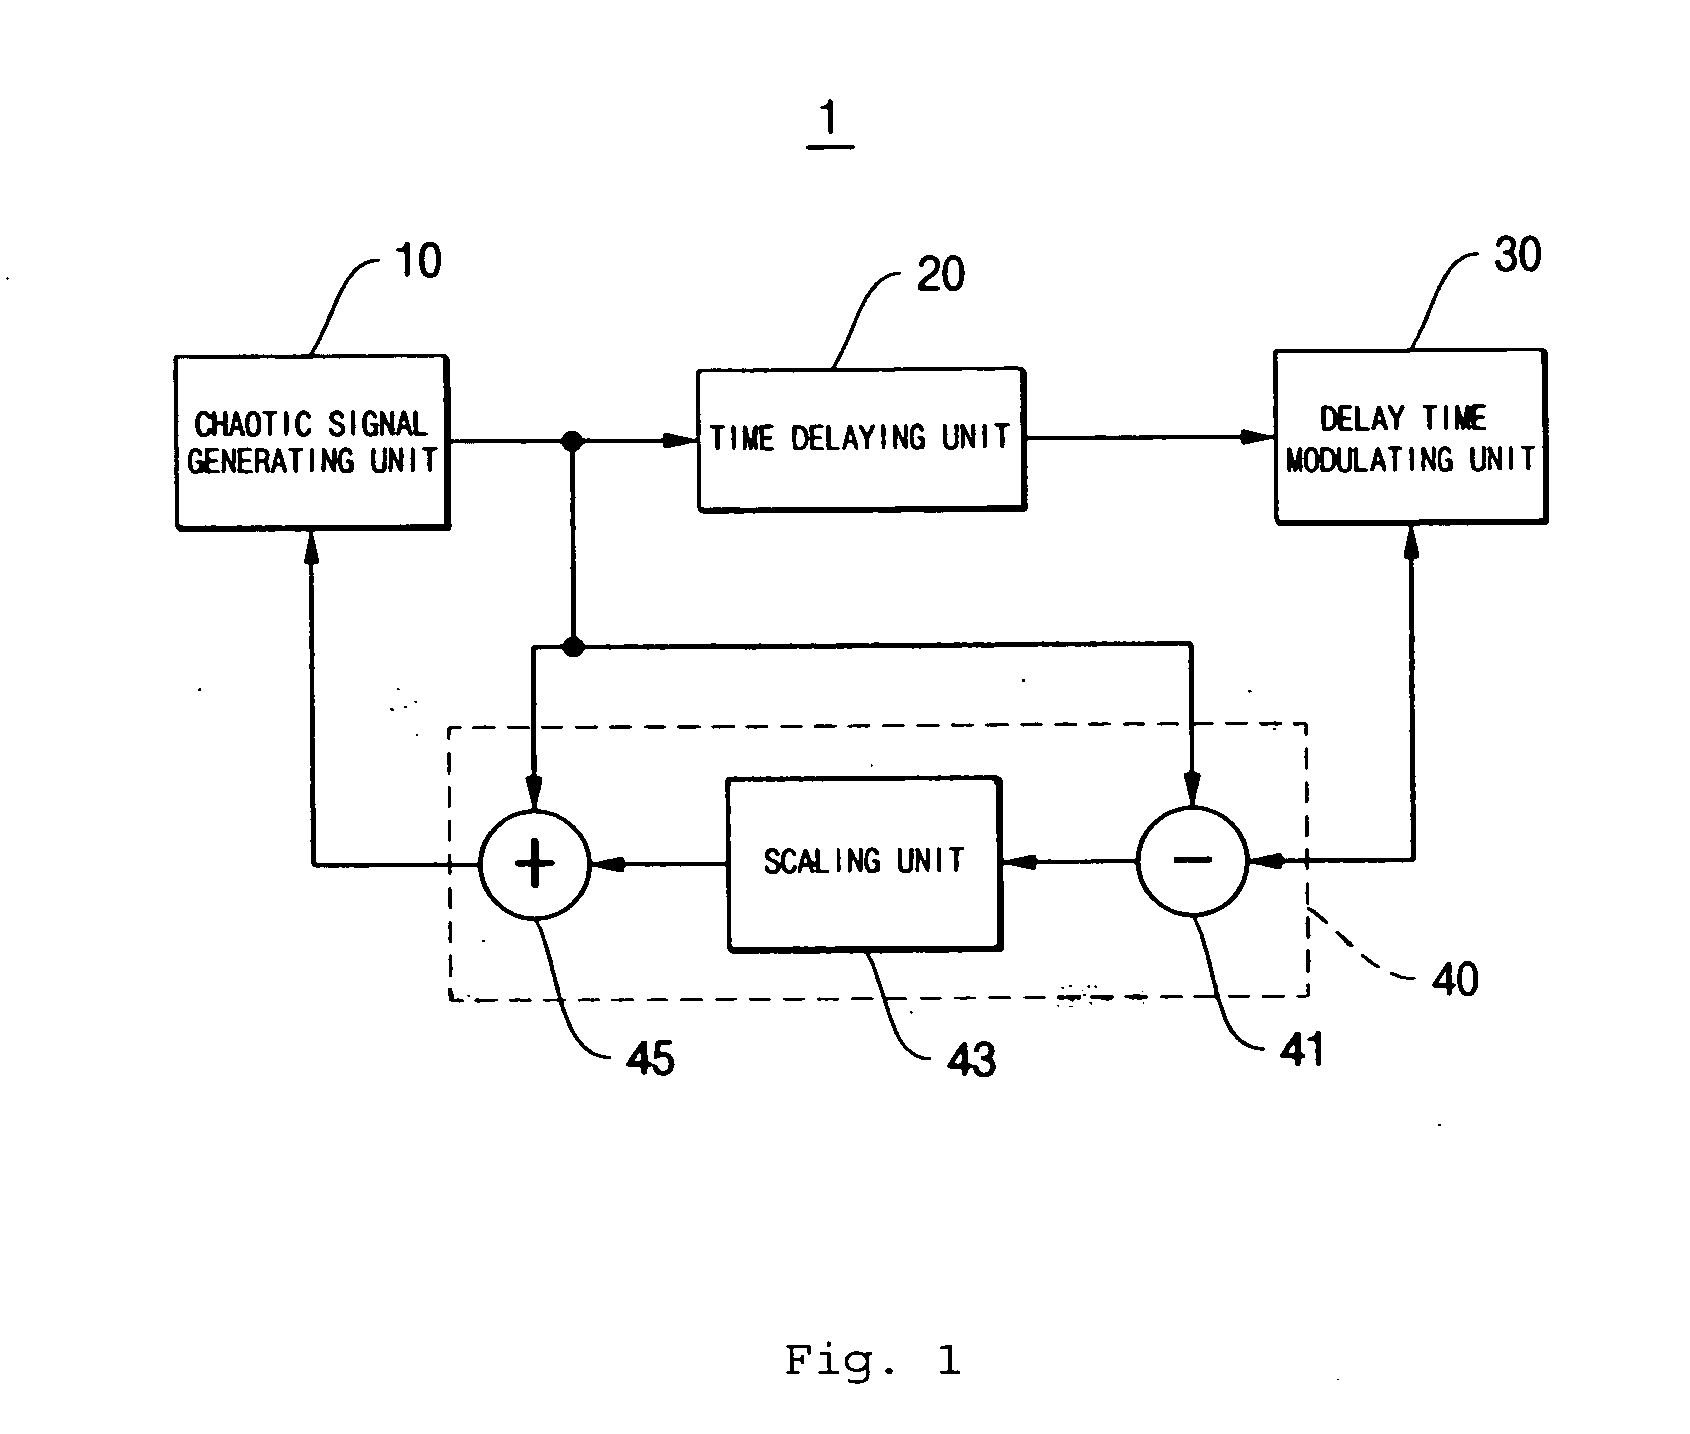 Encryption and communication apparatus and method using modulated delay time feedback chaotic system